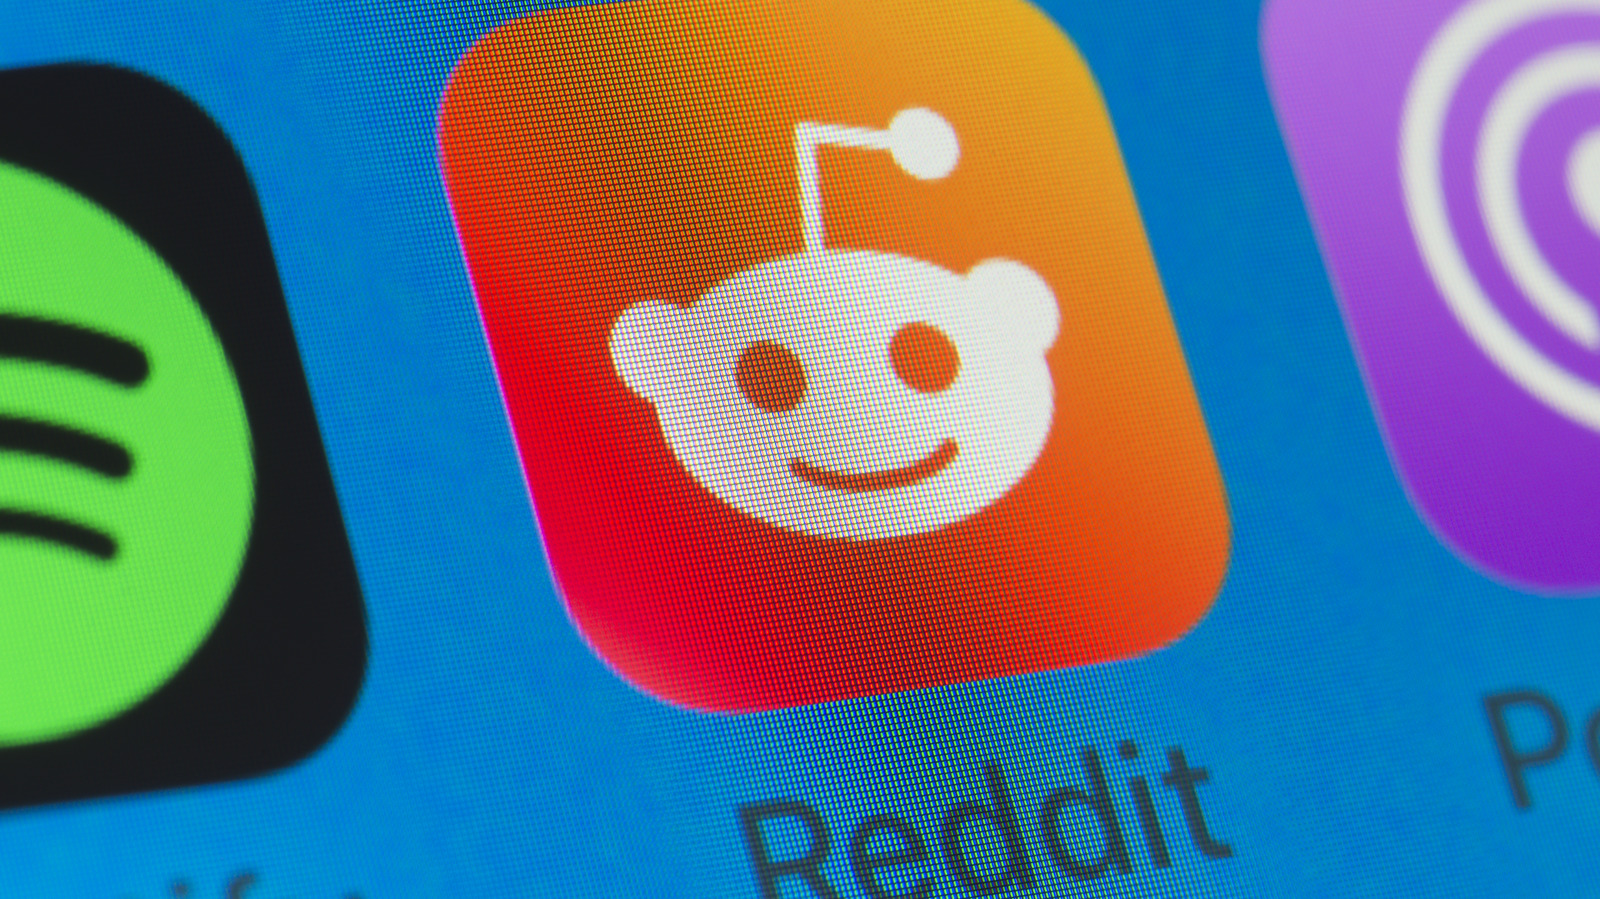 Reddit Shows No Signs Of Backing Down From Controversial API Changes In Heated AMA – SlashGear